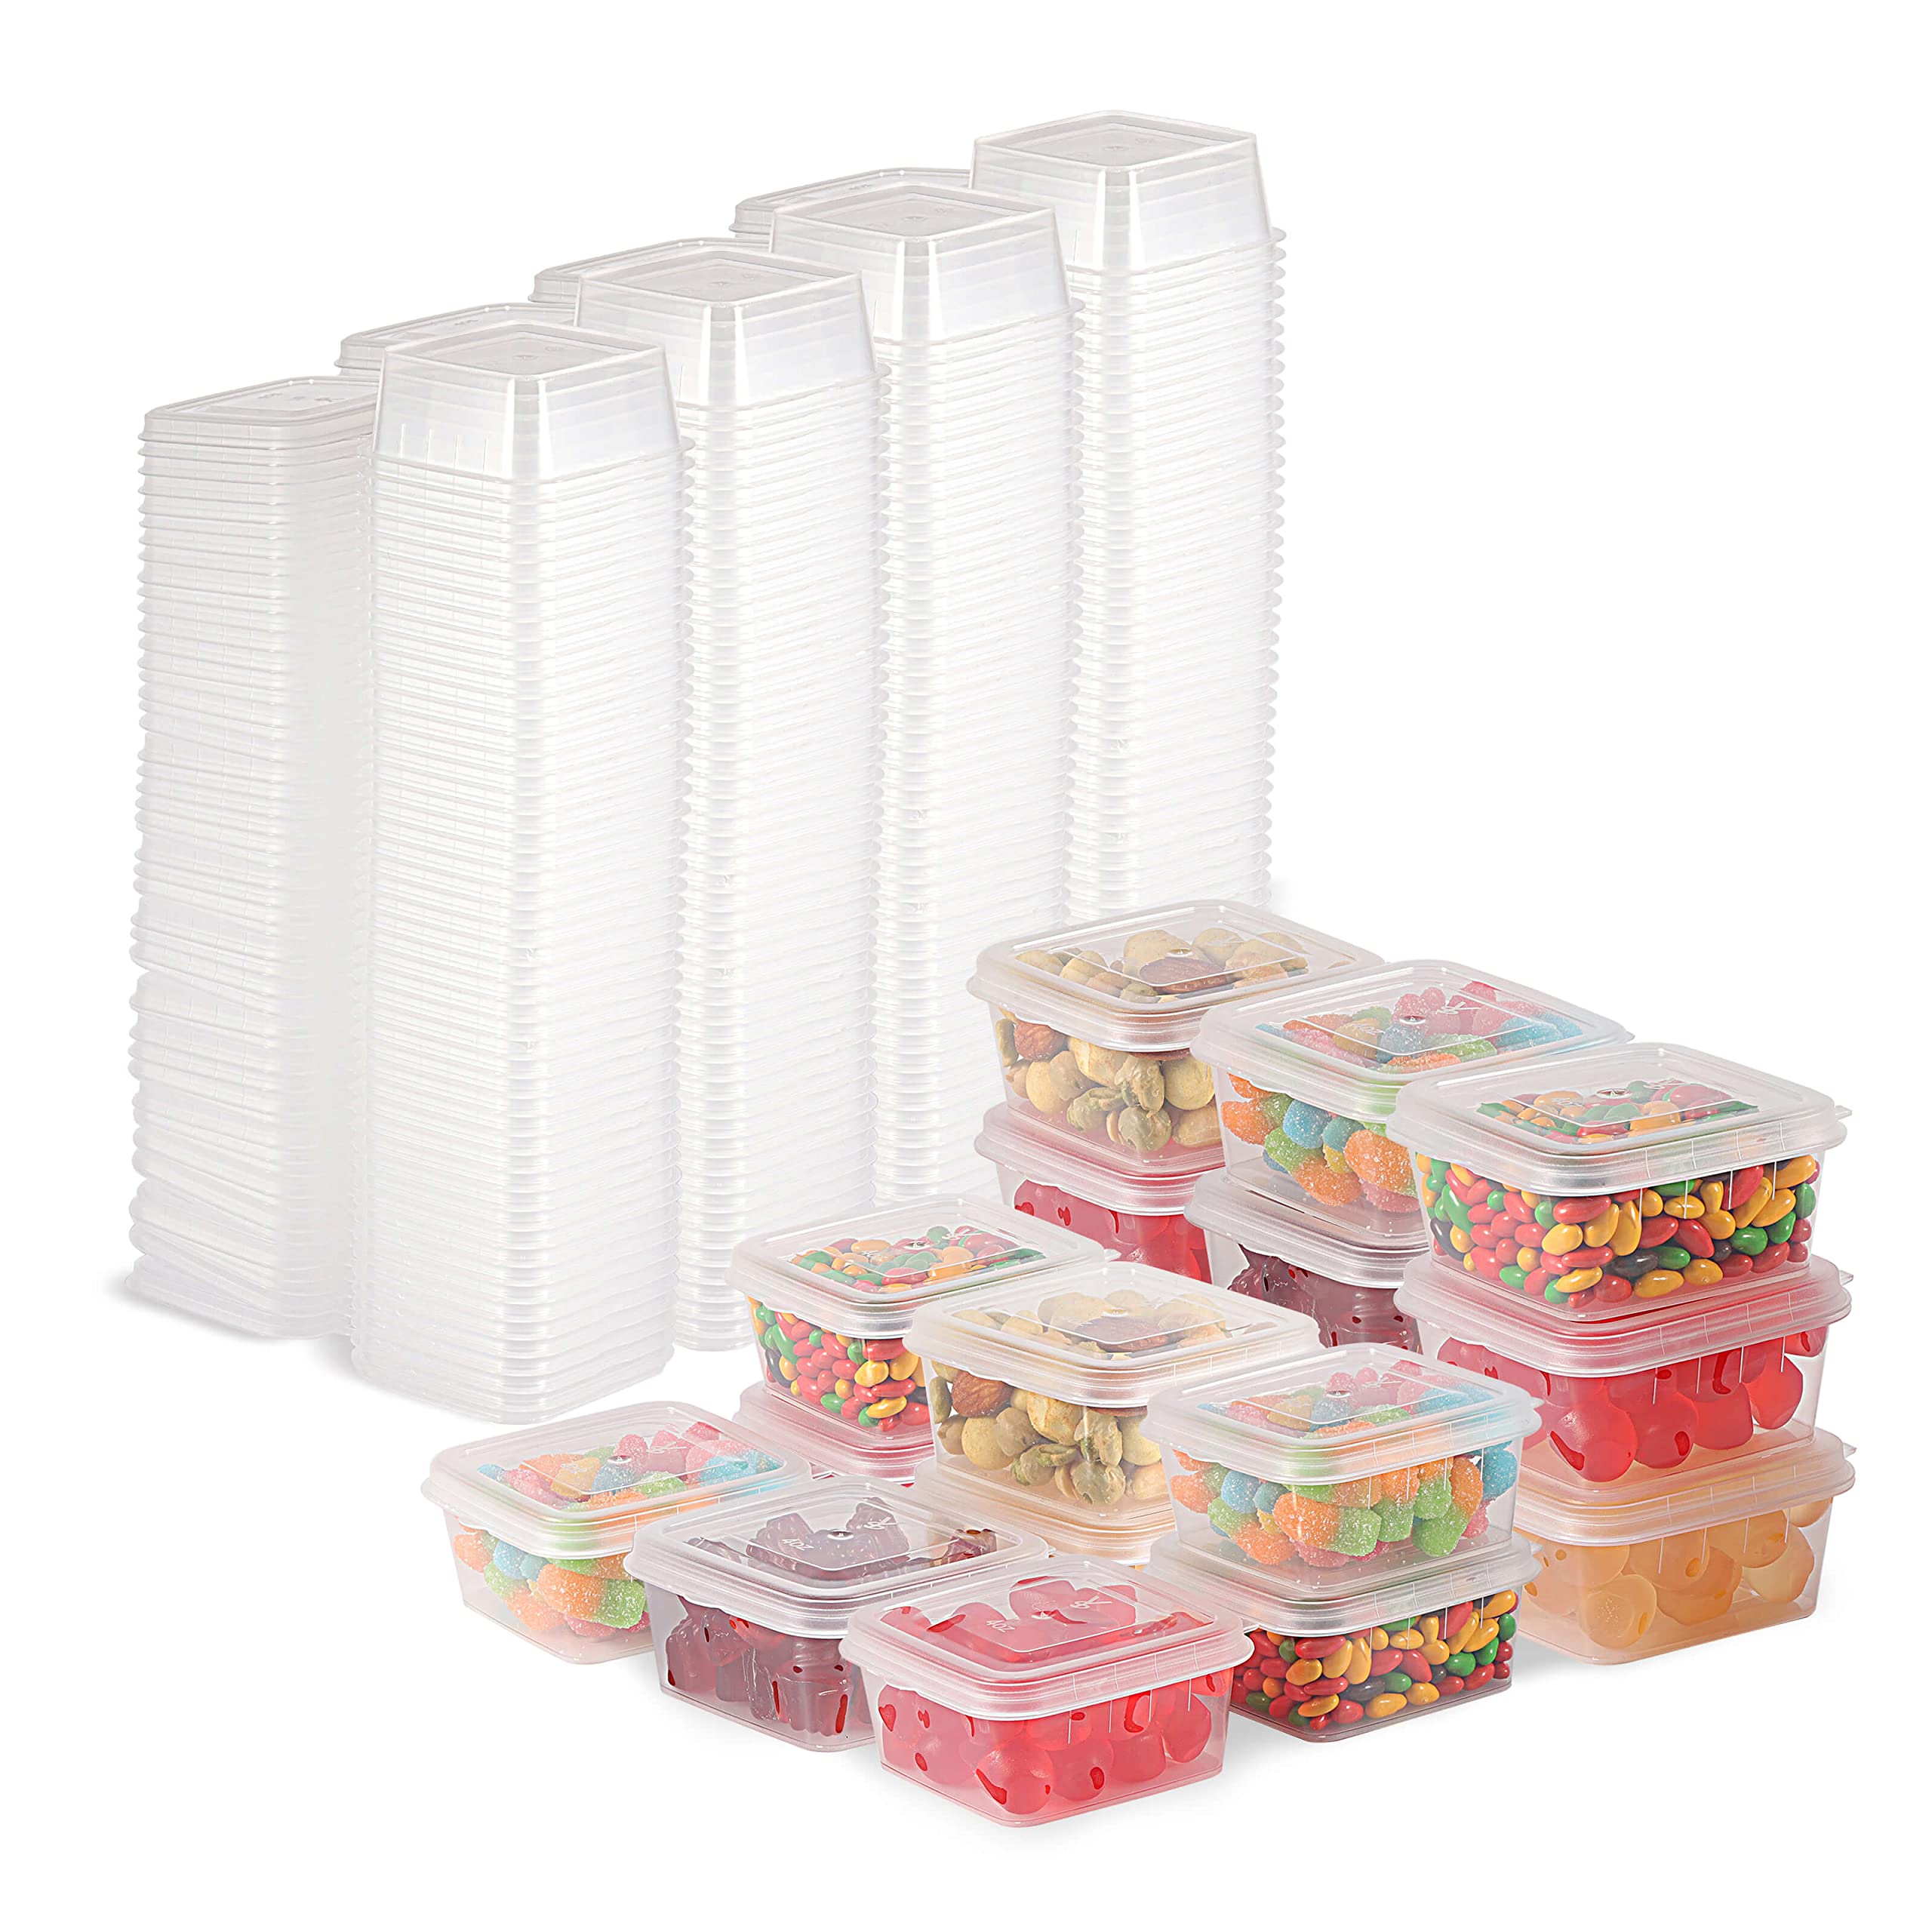 RIKICACA 4oz 200 Pack Small Plastic Containers with Lids Jello Shot Cups  with Lids Portion Cups with Lids Sauce Cups Disposable Condiment Containers  for Food (Square)